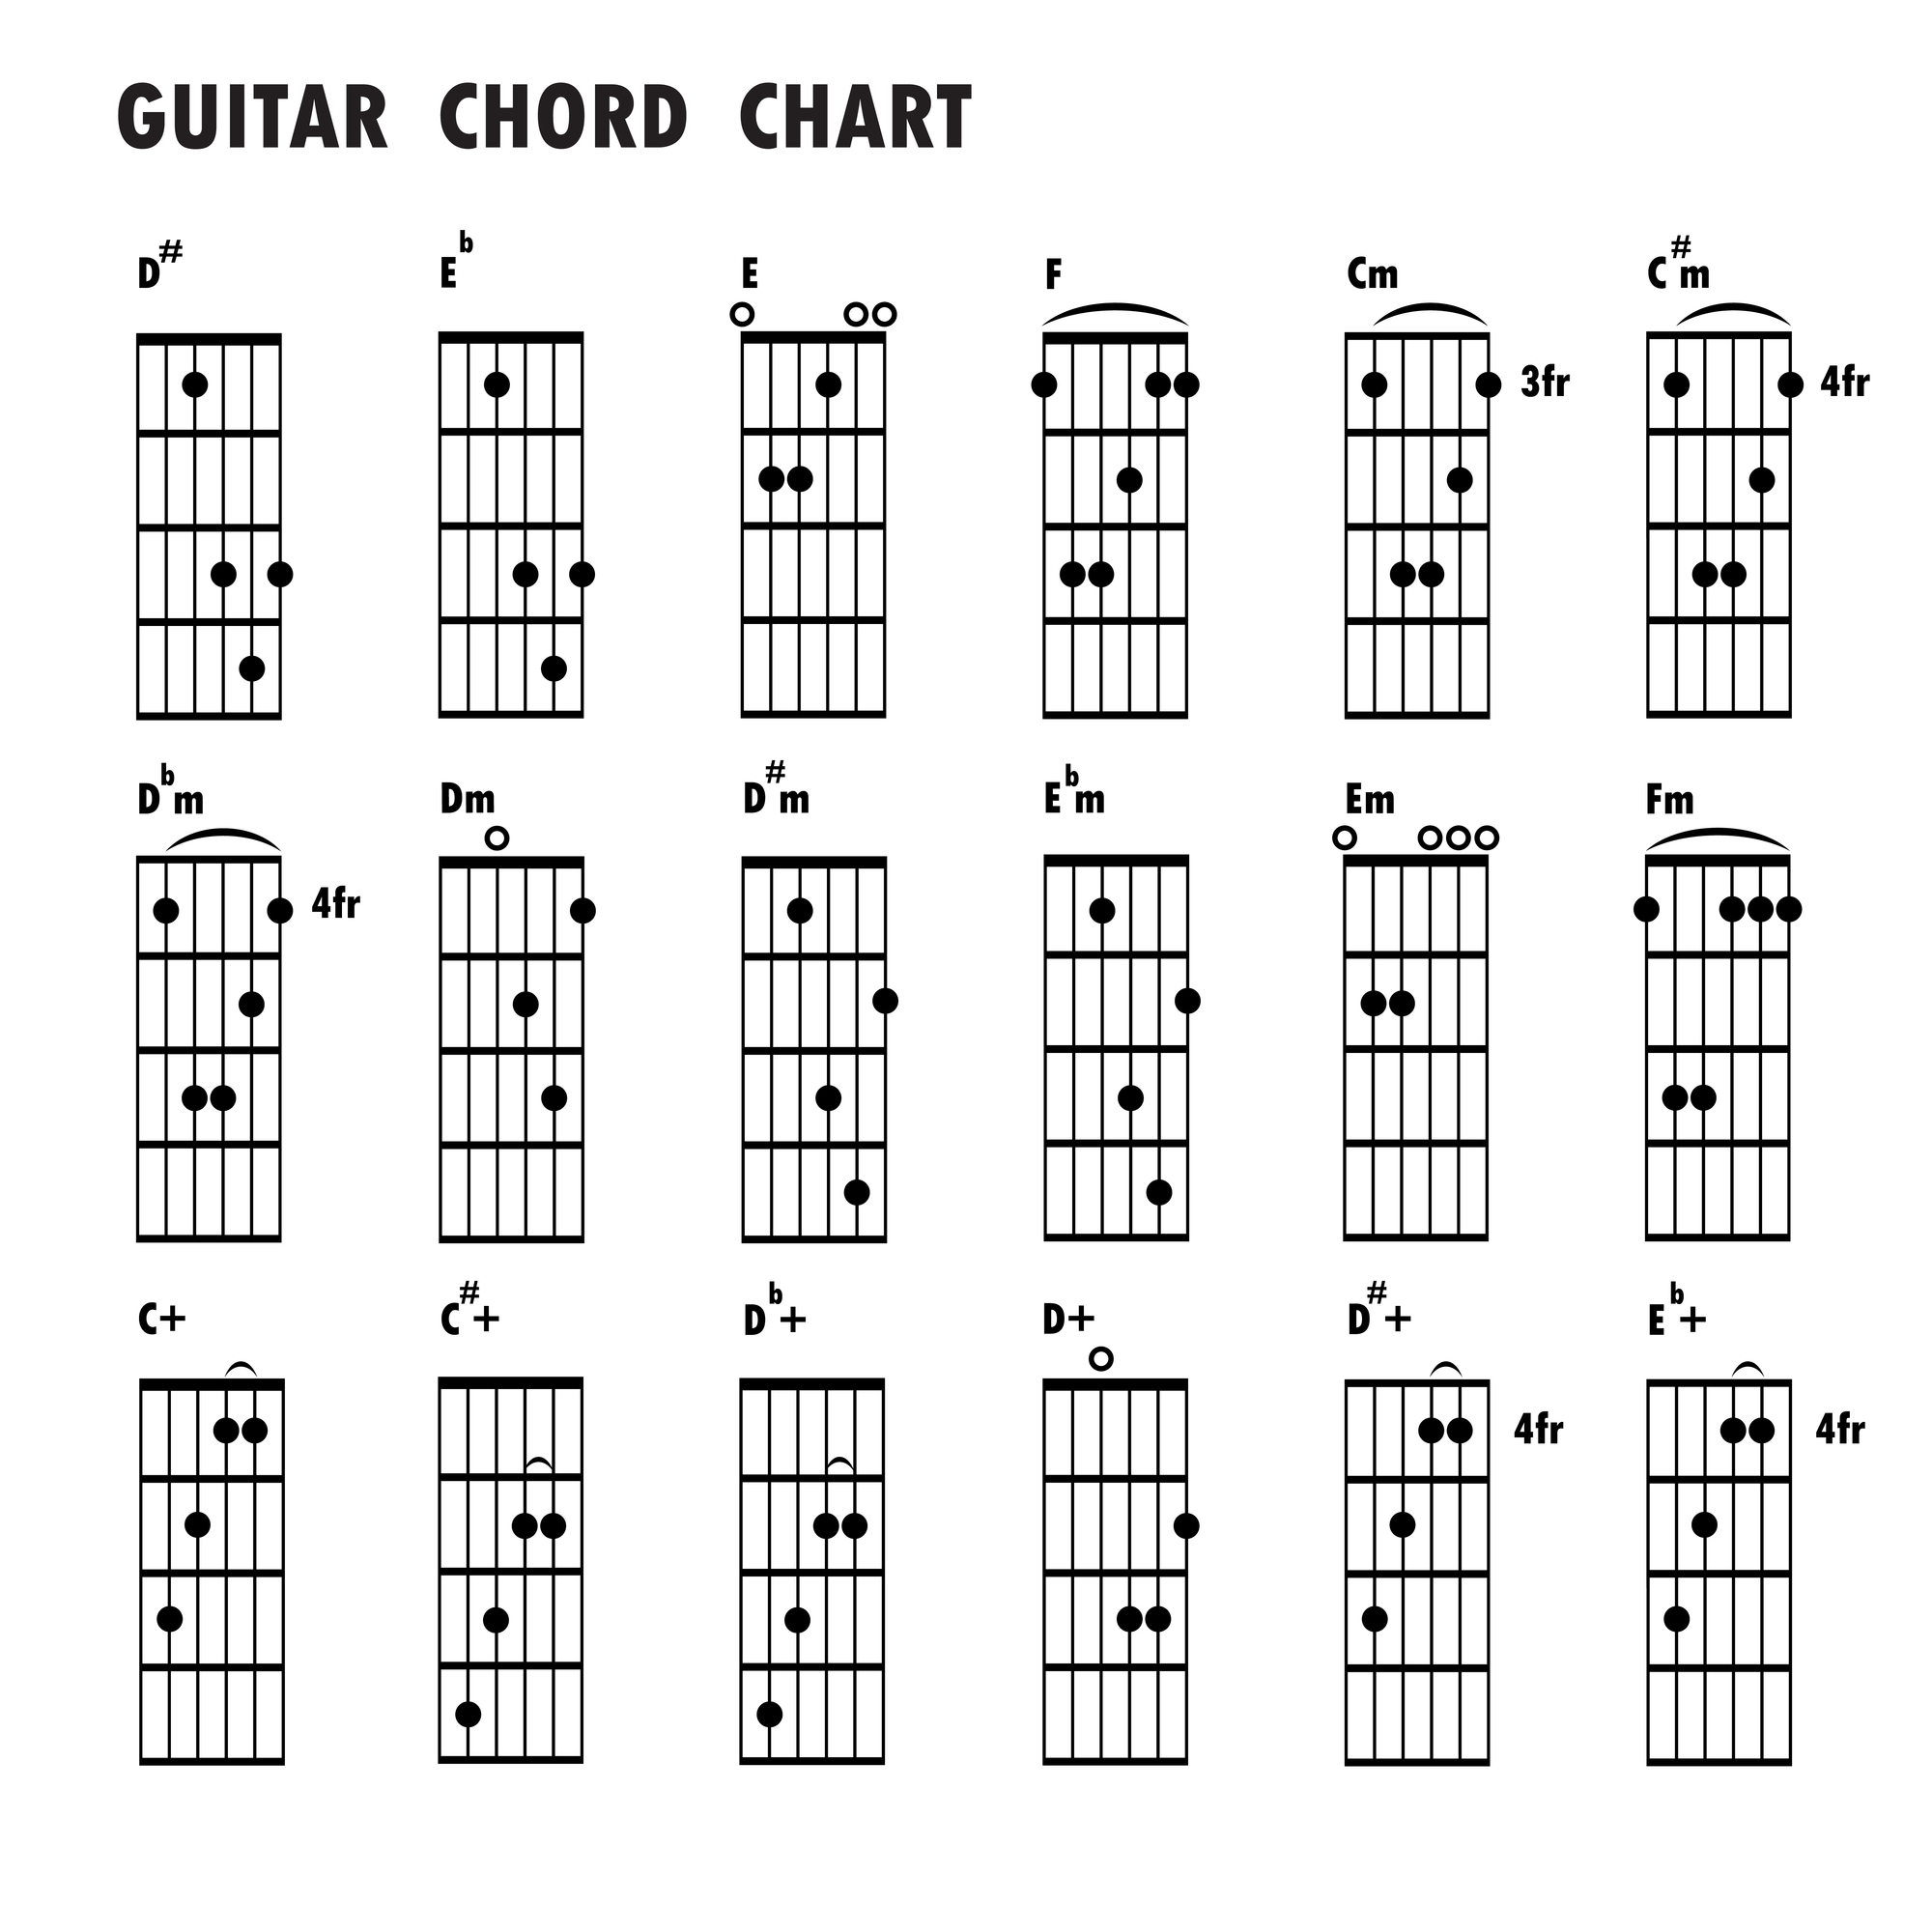 Guitar Chord Chart A Comprehensive Guide To Reading Guitar Chord Diagrams